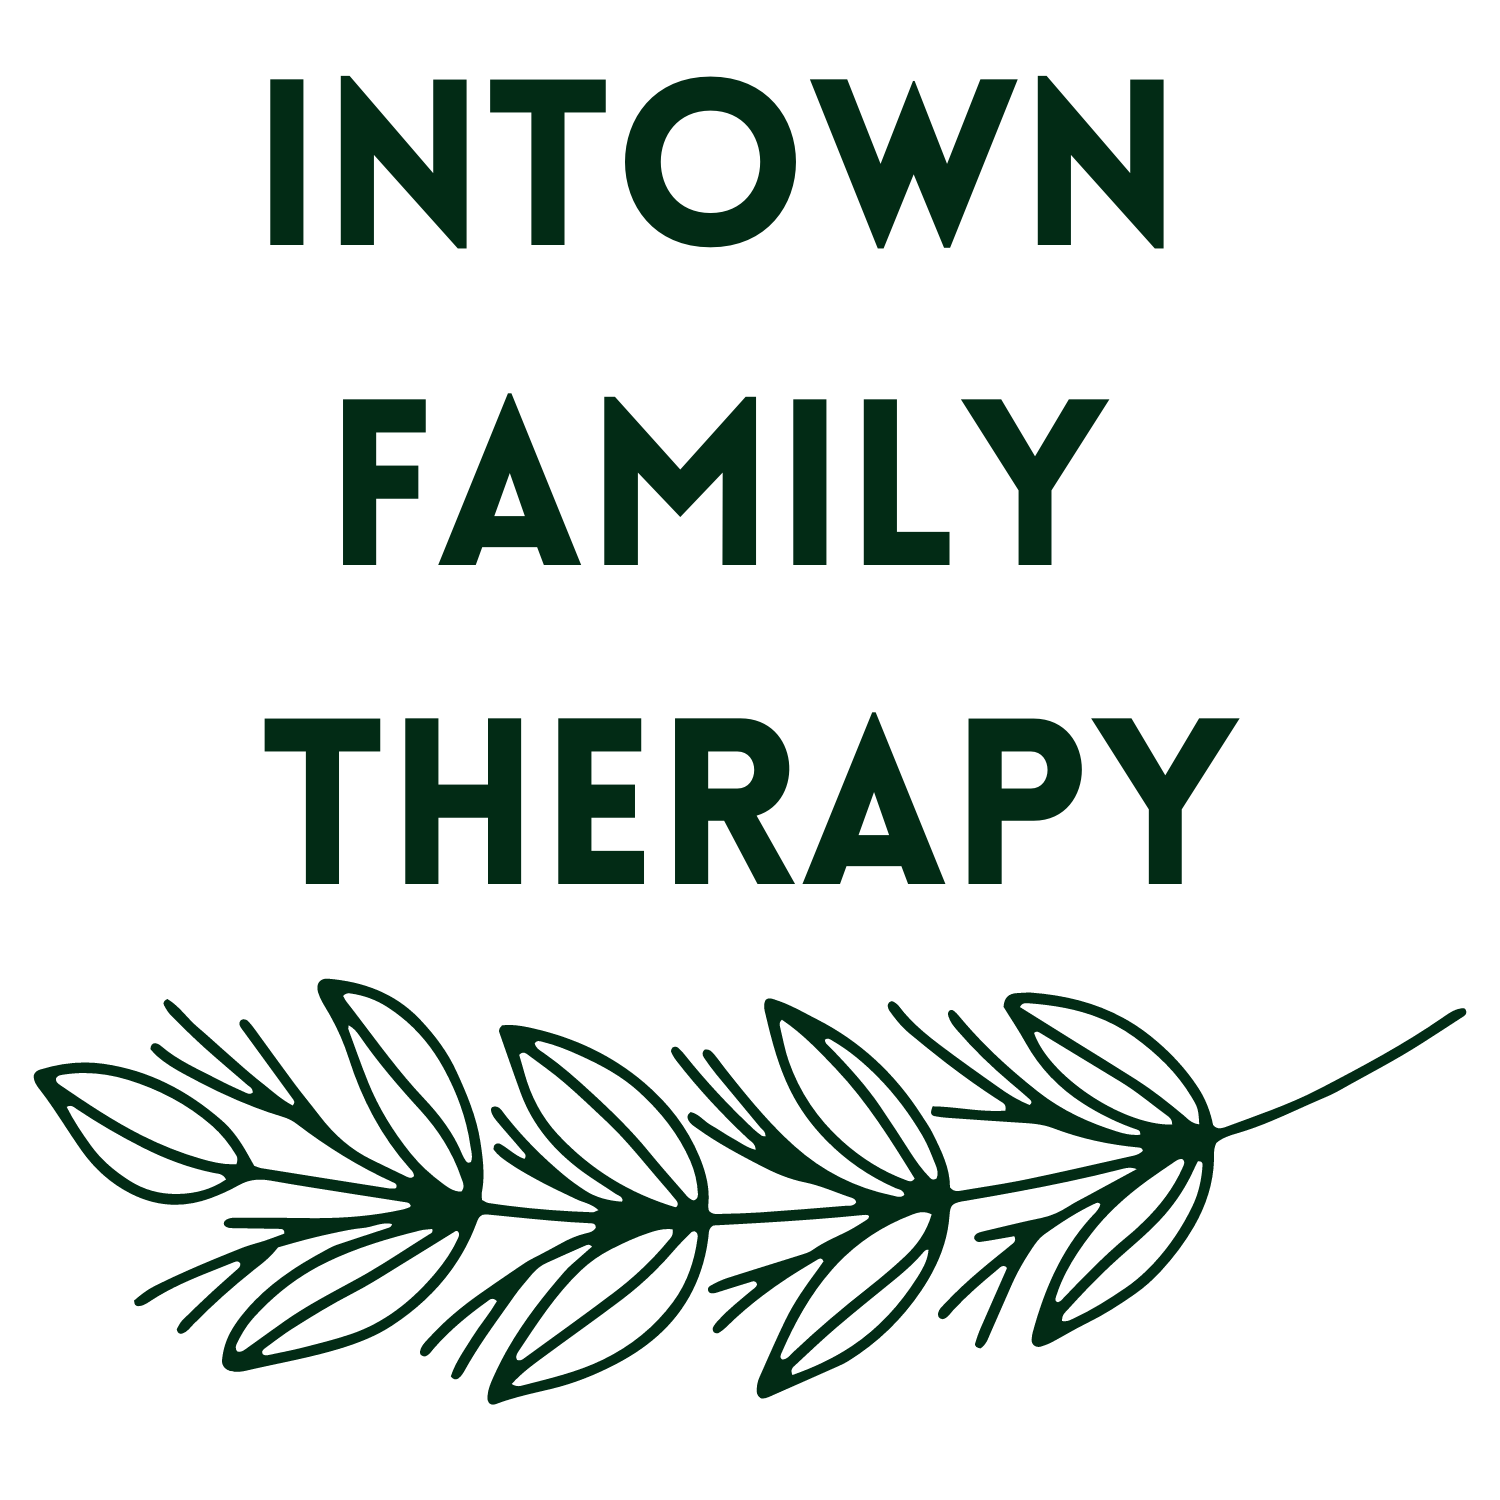 Intown Family Therapy